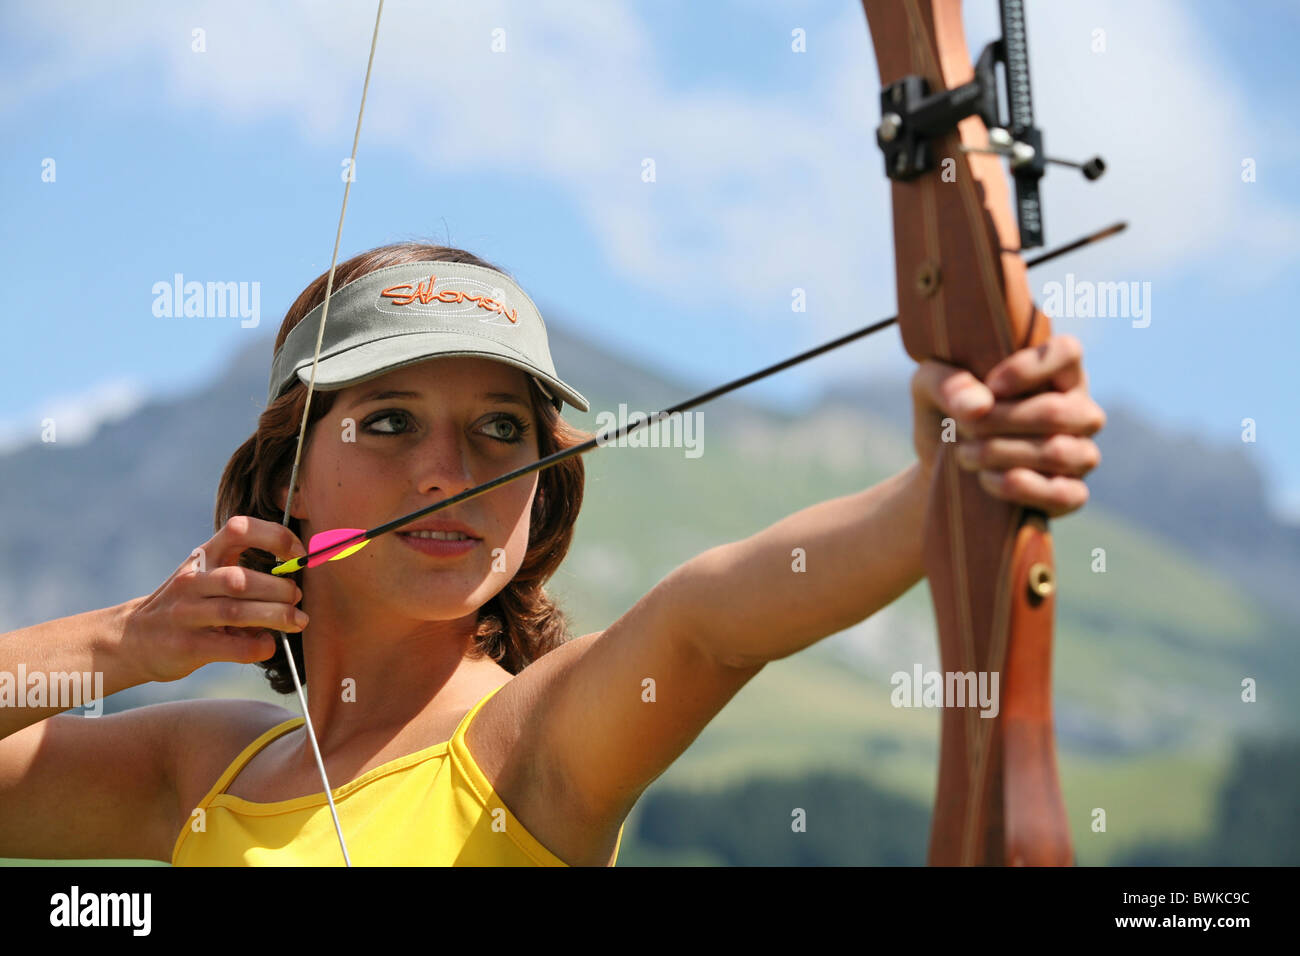 archery Outside curves arrow sighting woman weapon arms firearm sports precision sport shooter archer bow Stock Photo